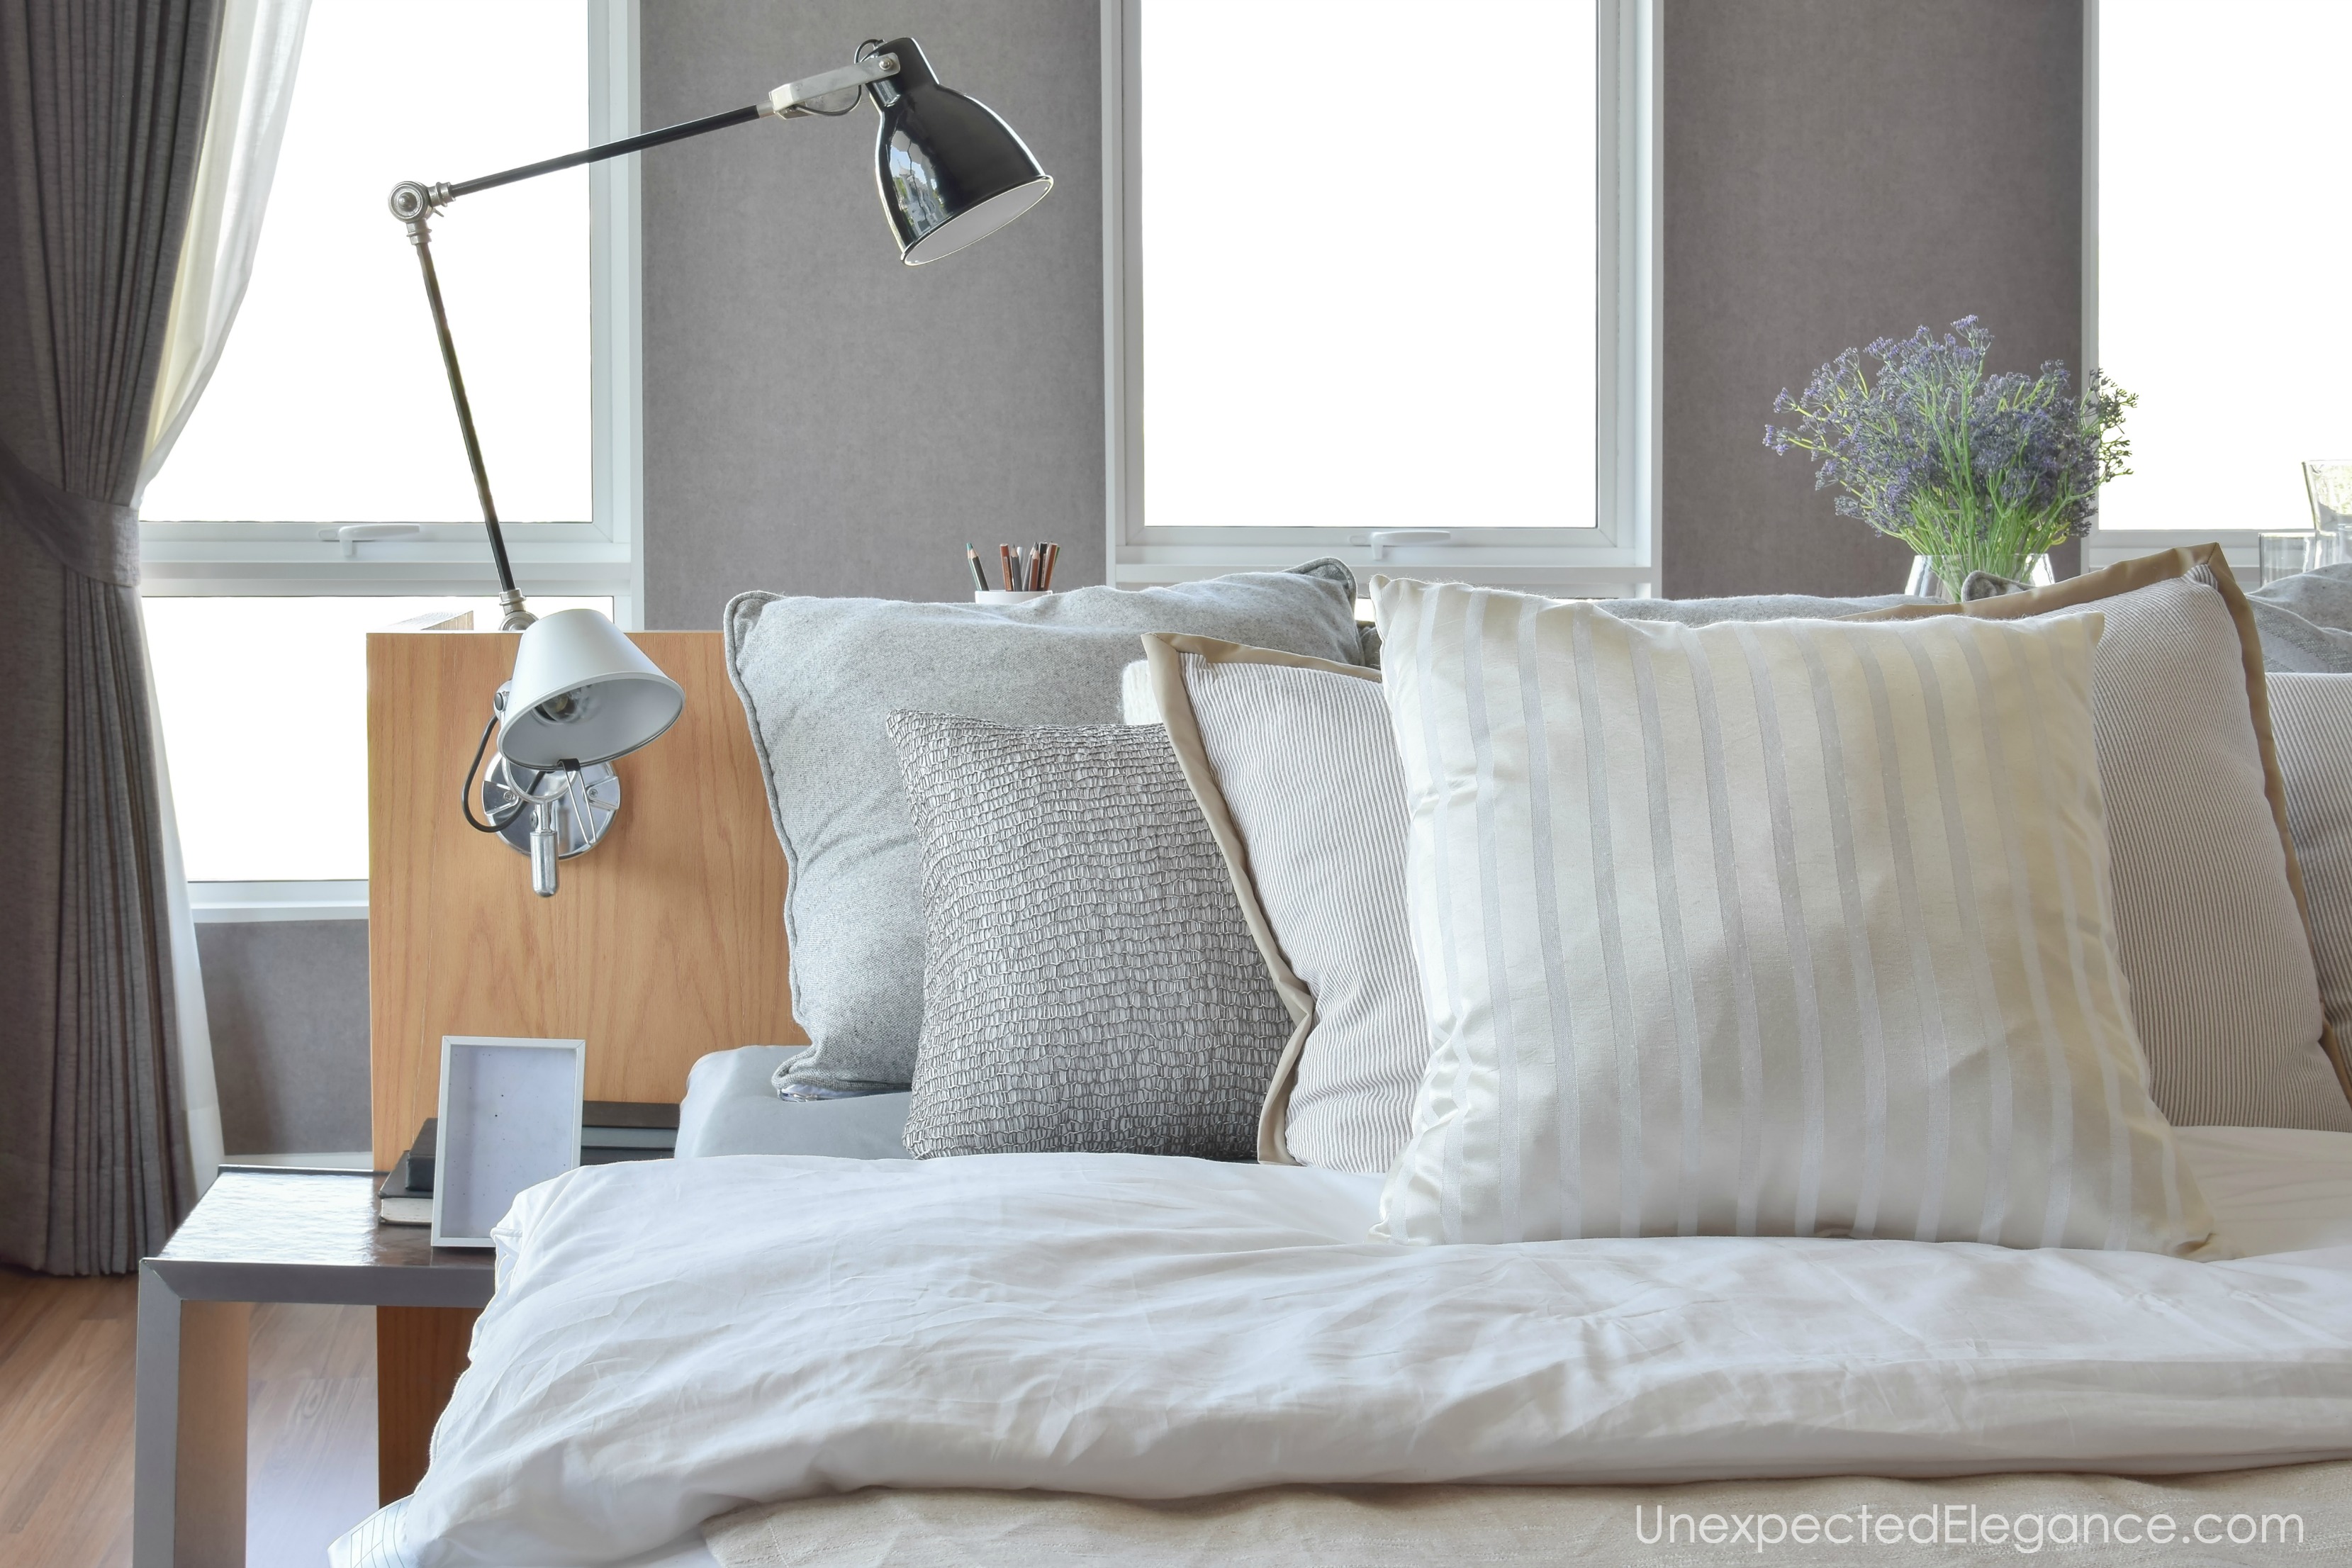 If you want a new look in your bedroom, but don't want to spend a lot of money...start with your bed. Here are 4 ways to update a wooden headboard easily!